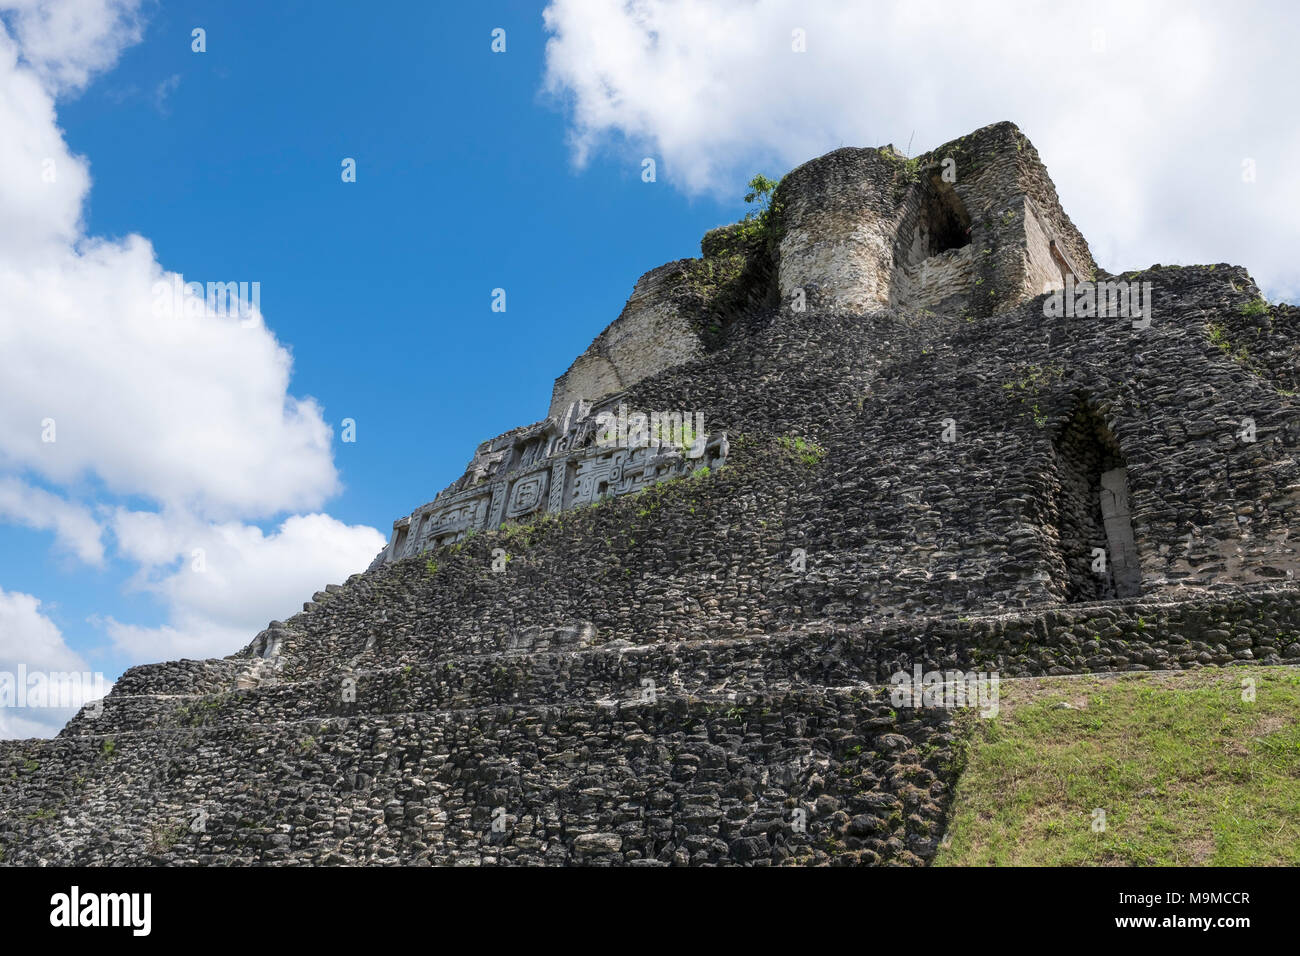 Ancient Mayan temple ruins and structures in Xunantunich, Belize Stock Photo